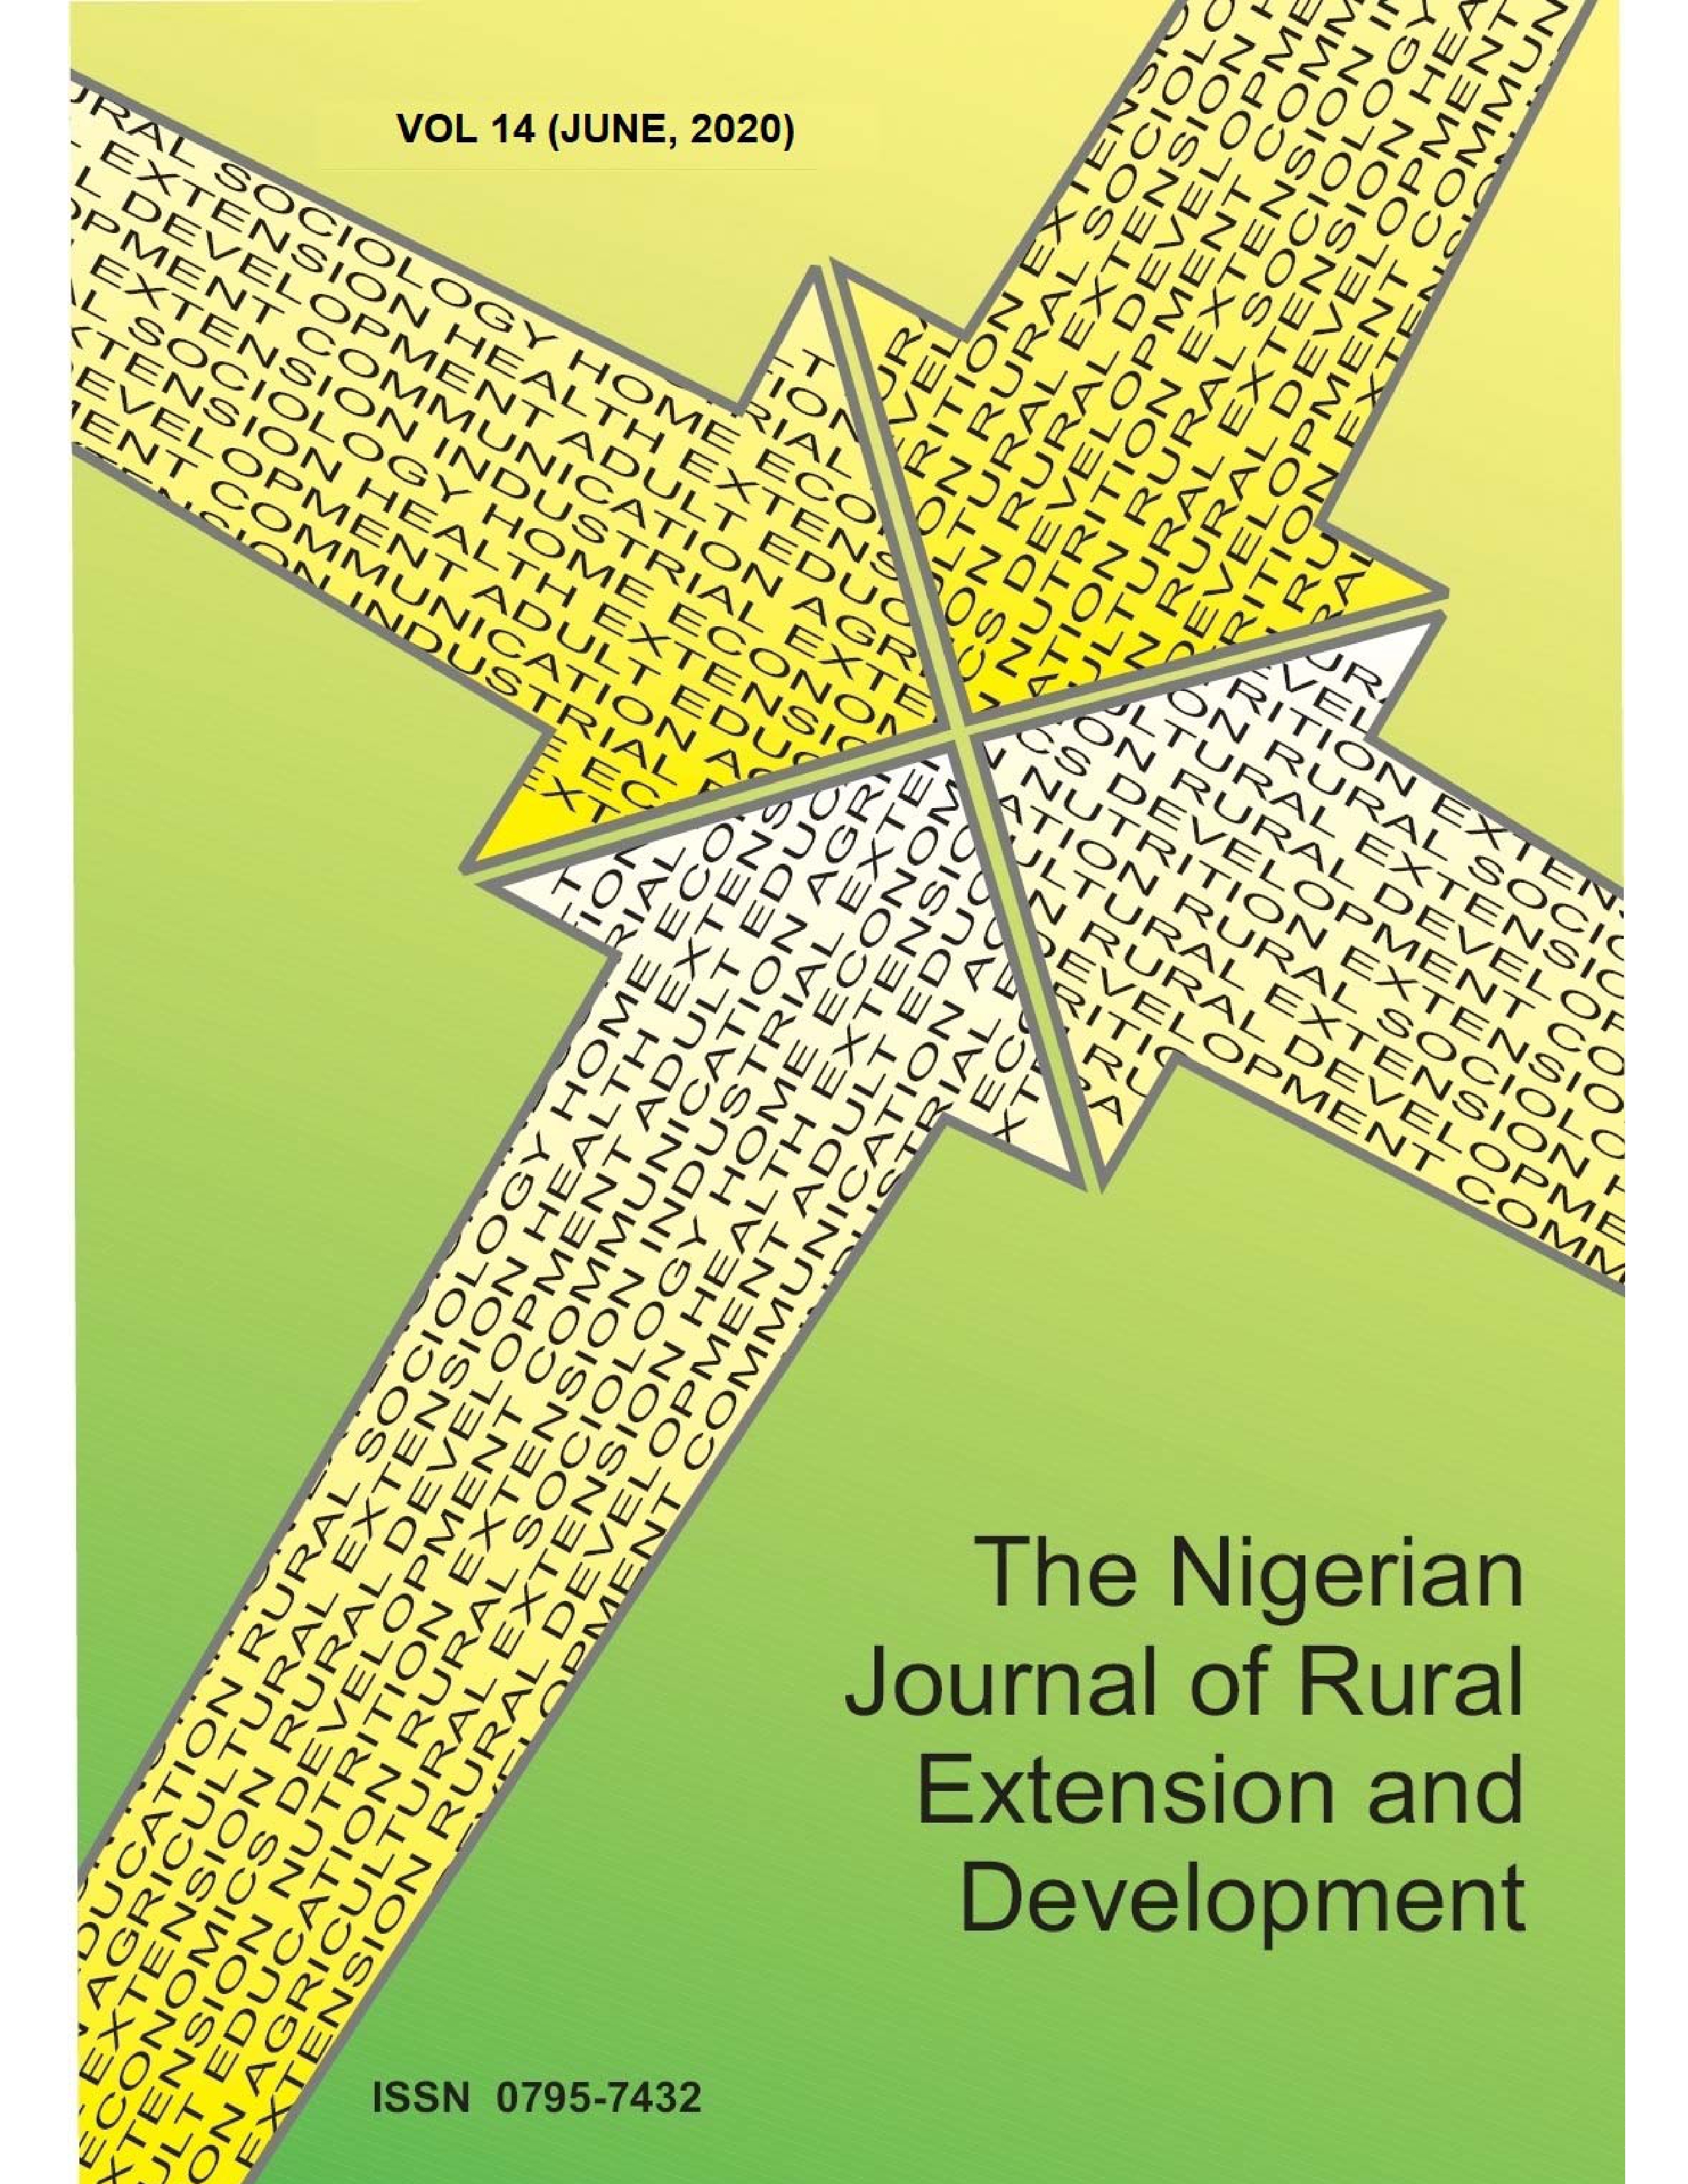 					View Vol. 14 No. 1 (2020): The Nigerian Journal of Rural Extension and Development  (NJRED)
				